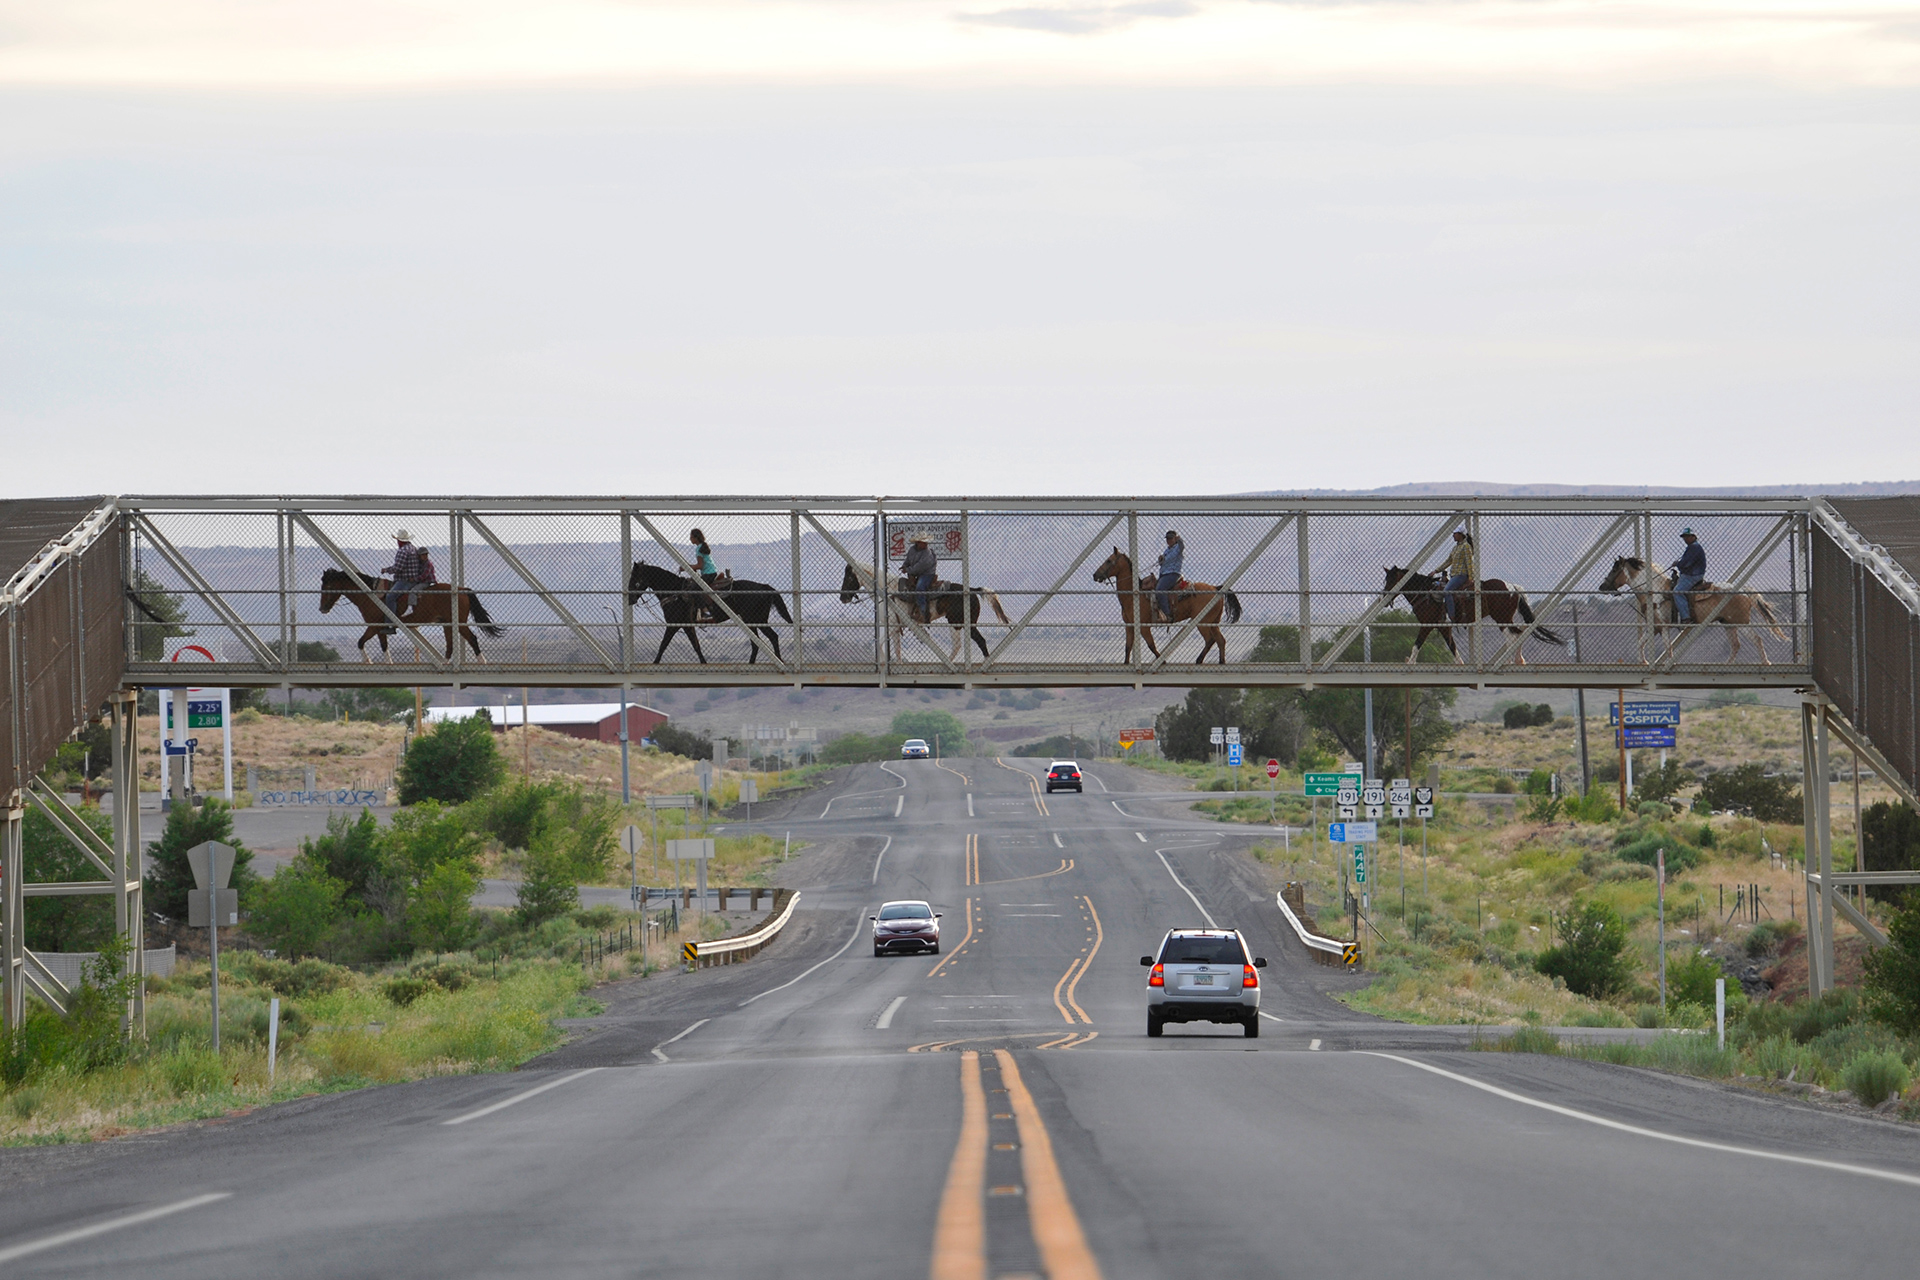 Photograph of family riding horses on an overpass